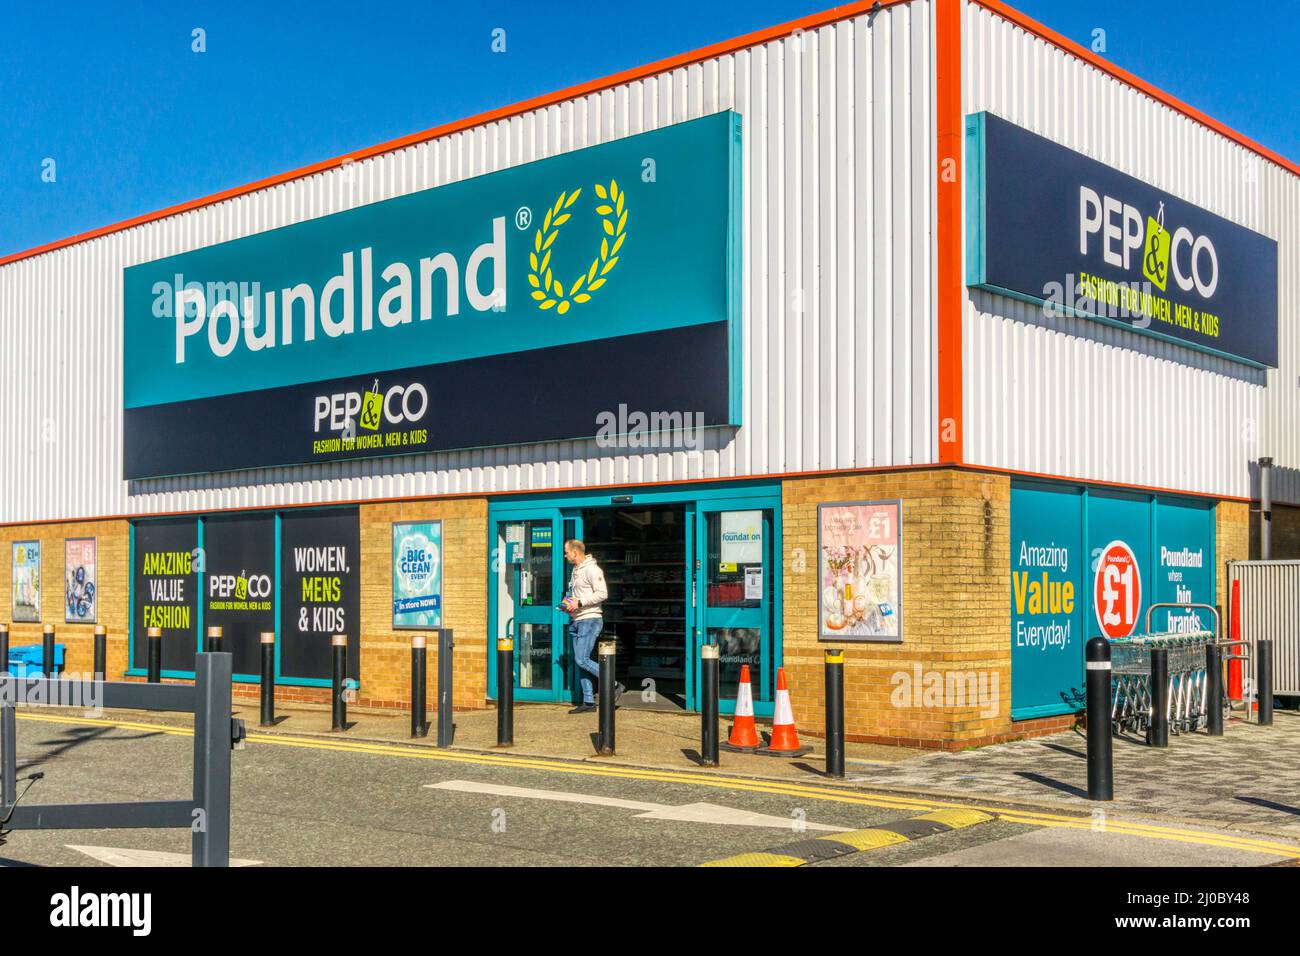 A Pep&Co discount fashion store-in-a-store in a branch of Poundland in King's Lynn. Stock Photo